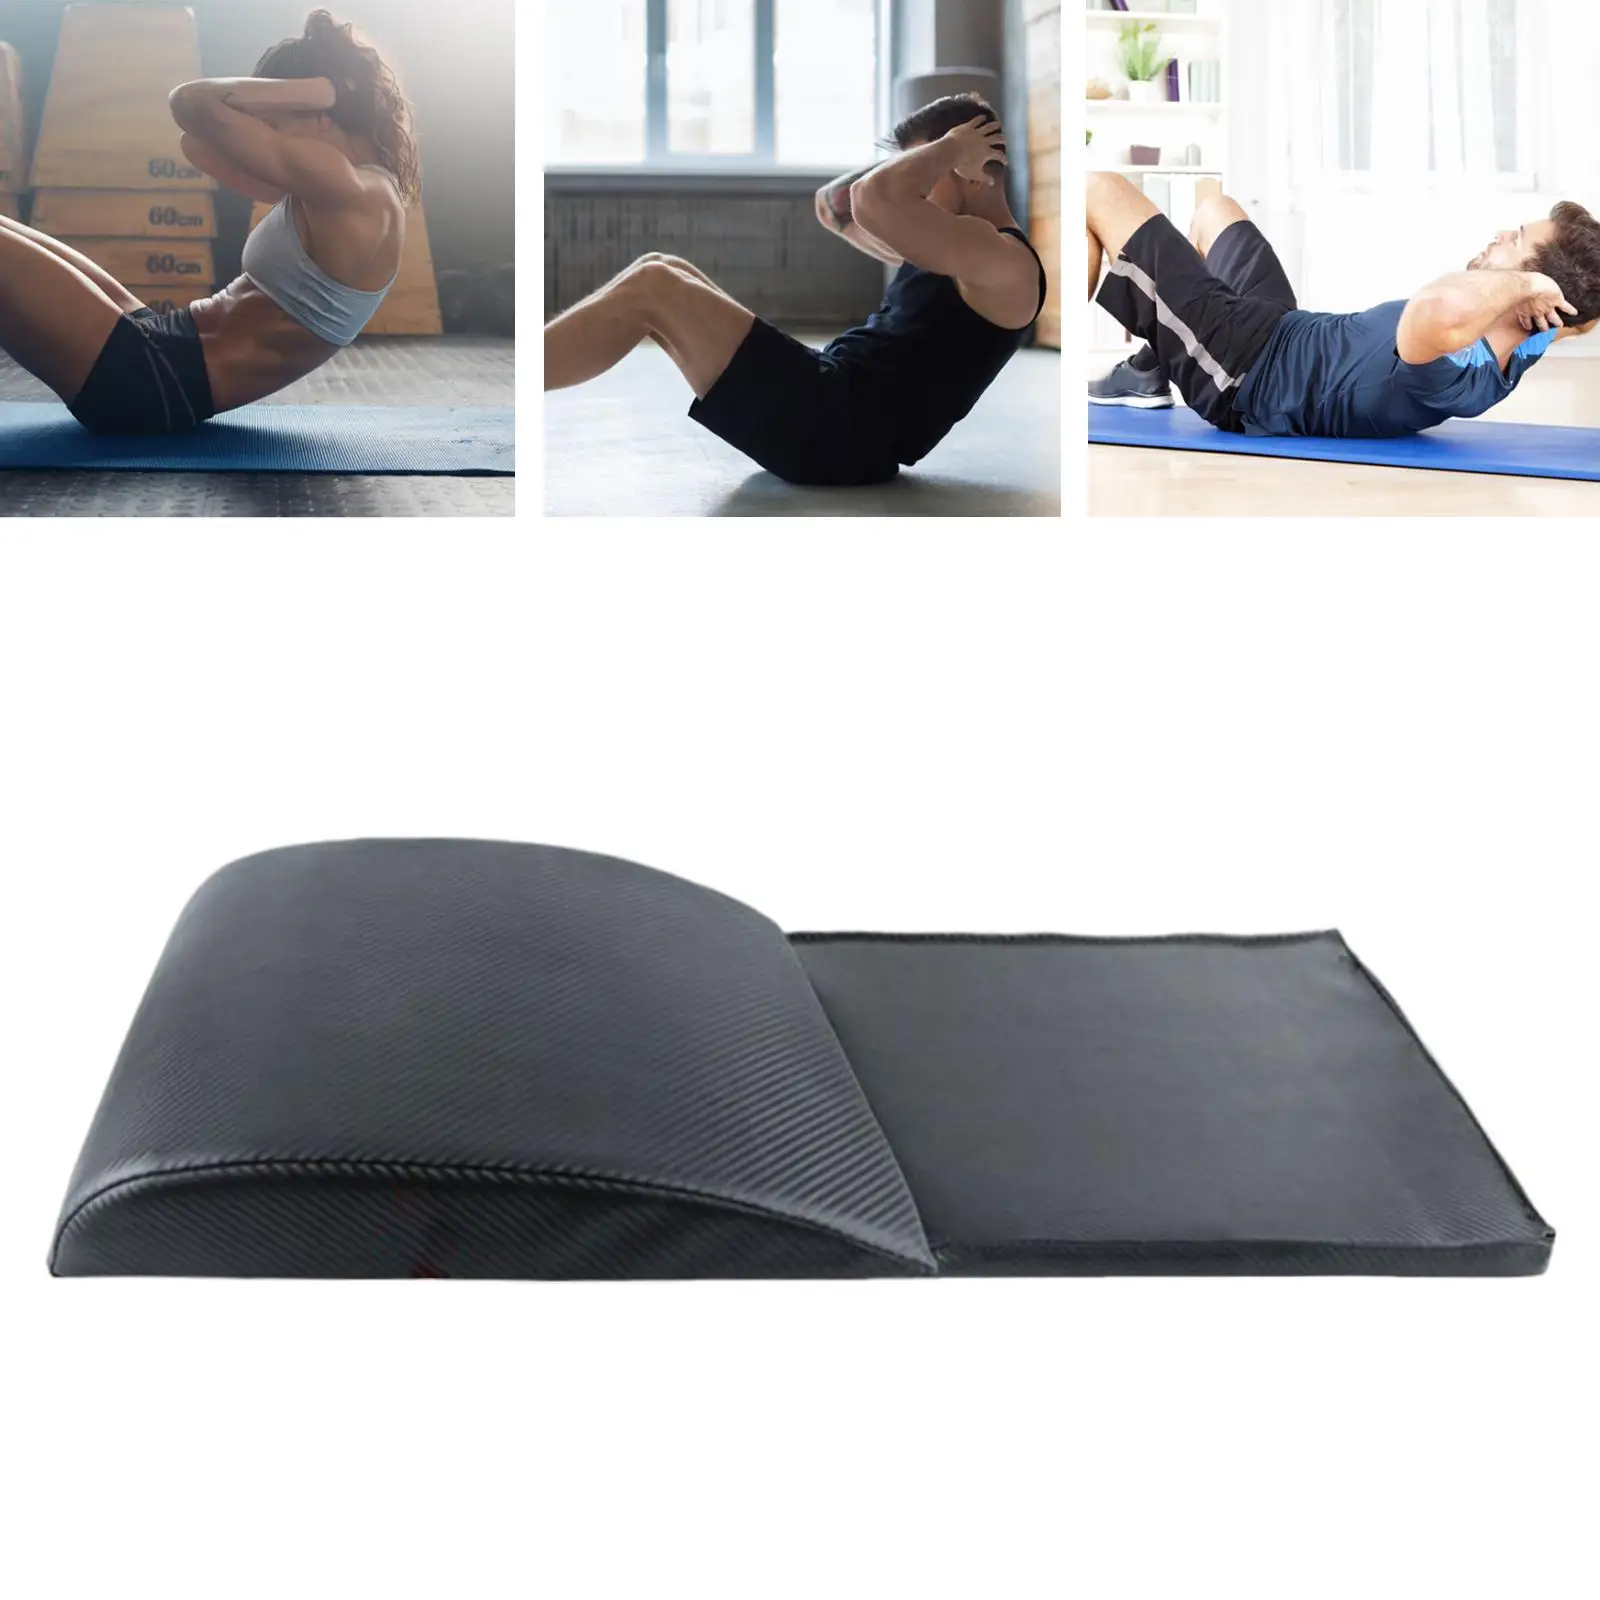 Fitness Ab Pad W/ Tailbone Protector Portable Foam Thick Sit up Core Training Pad Foldable Sit up Mat for Fitness Workouts Home